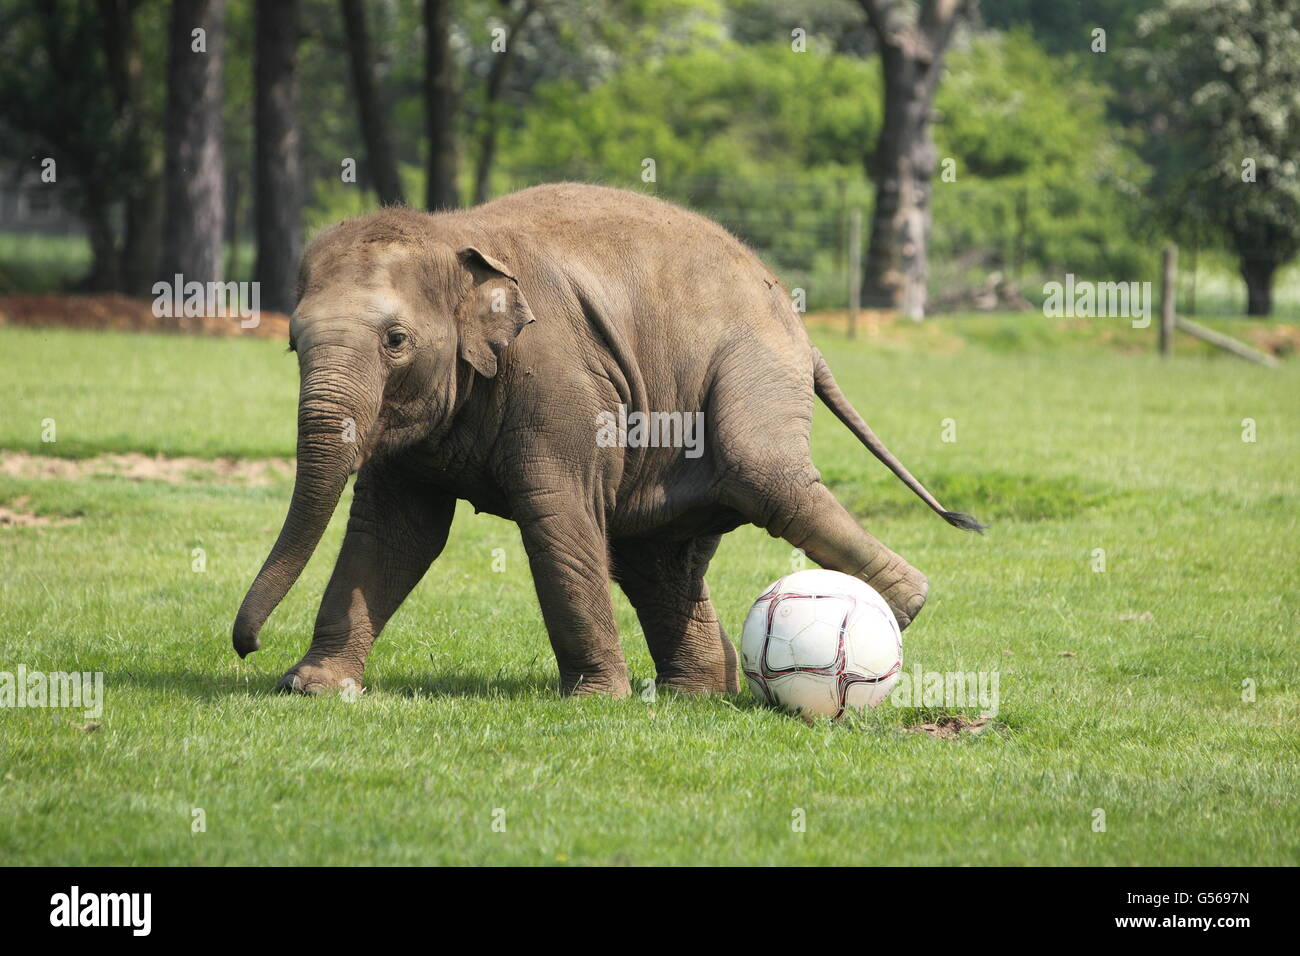 Elephant football. Elephant Donna plays with a football at ZSL Whipsnade Zoo near Dunstable, Bedfordshire. Stock Photo